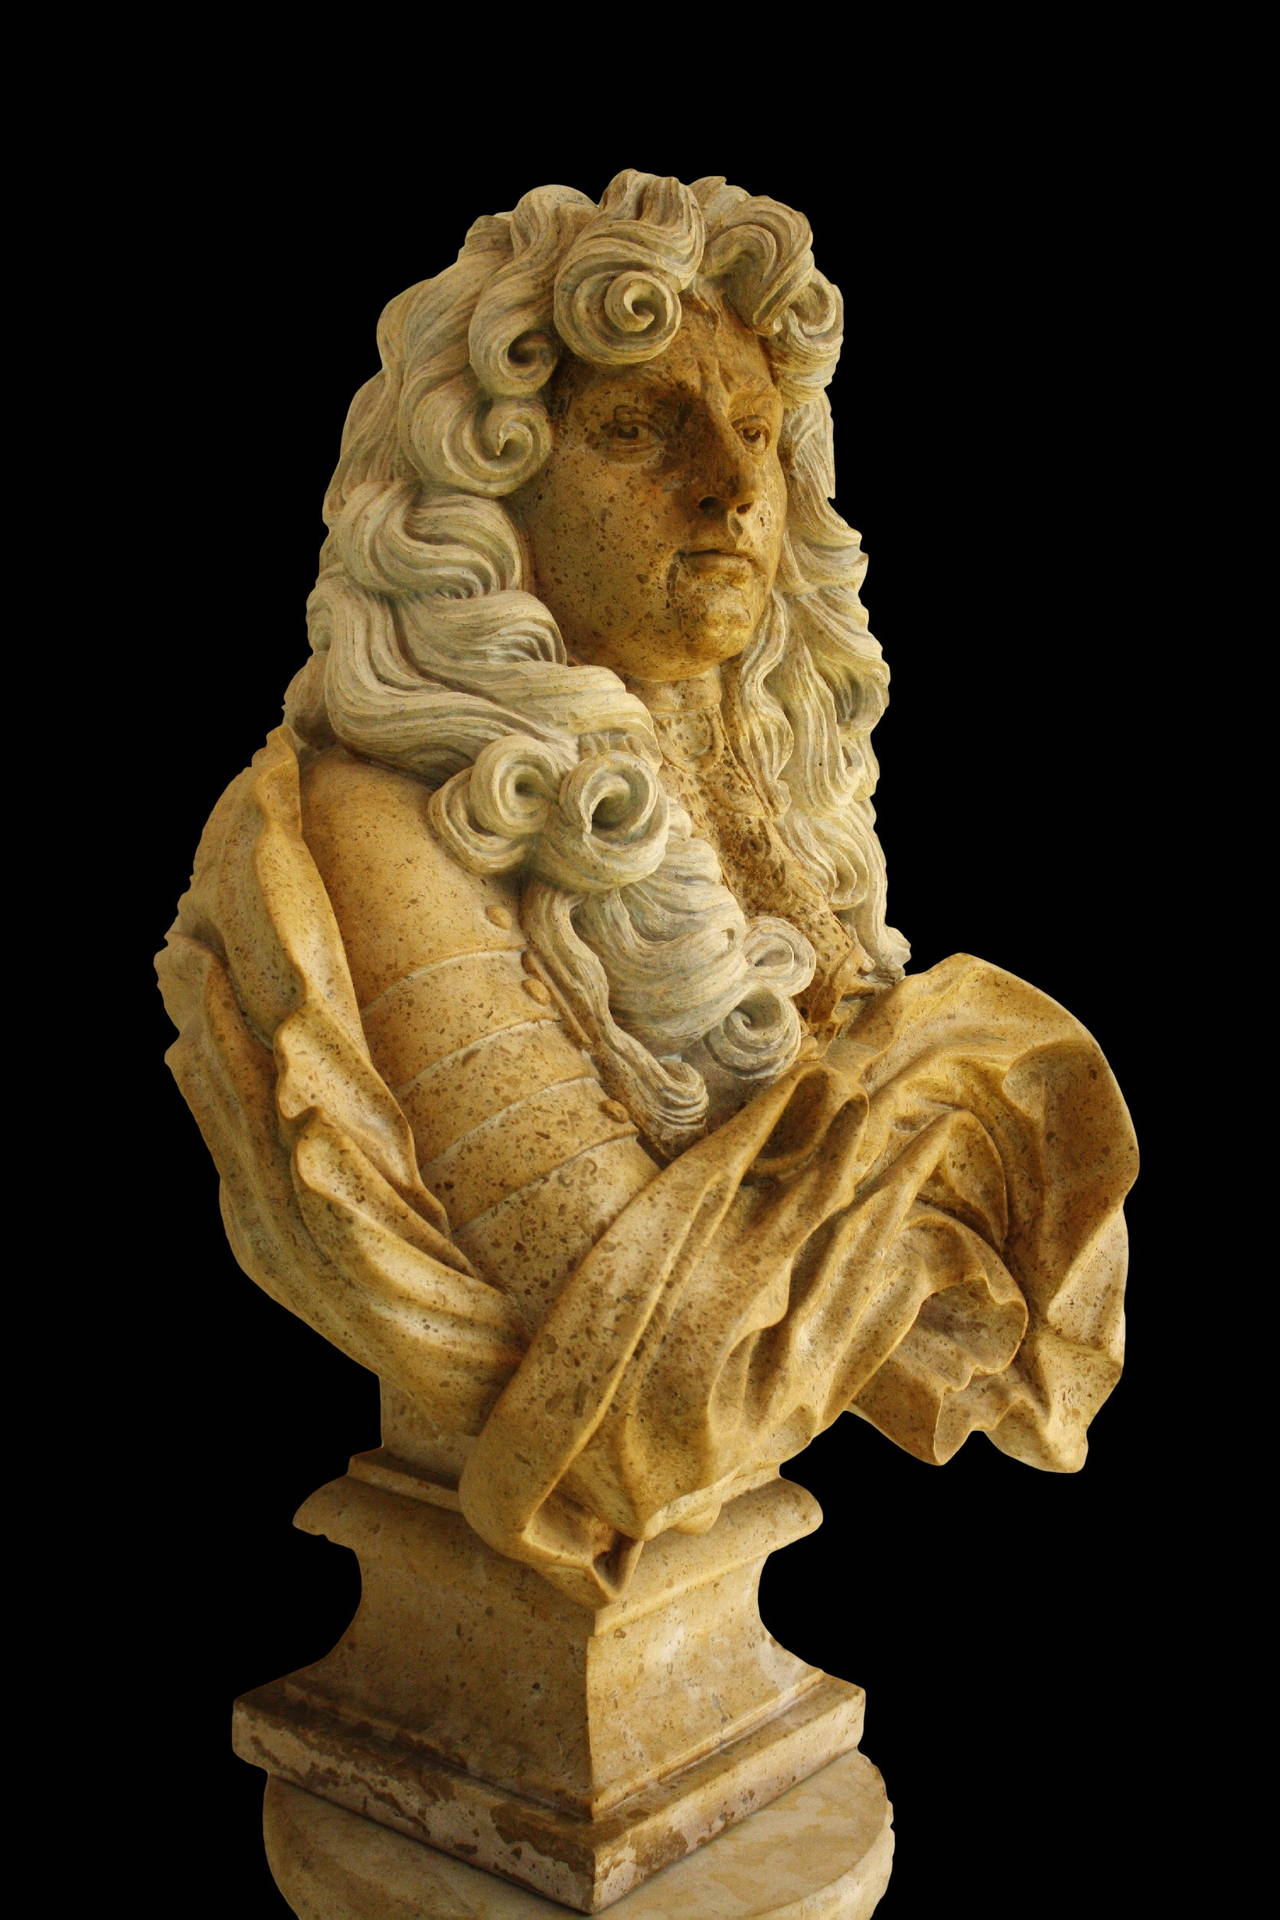 A Masterpiece of a Travertine bust. The bust presents the King Louis XIV in a lace collar and flowing cloak. He Looks away from the Viewer, as if purposefully avoiding his gaze. His wig seems to envelope his head and suggests the flaming locks of